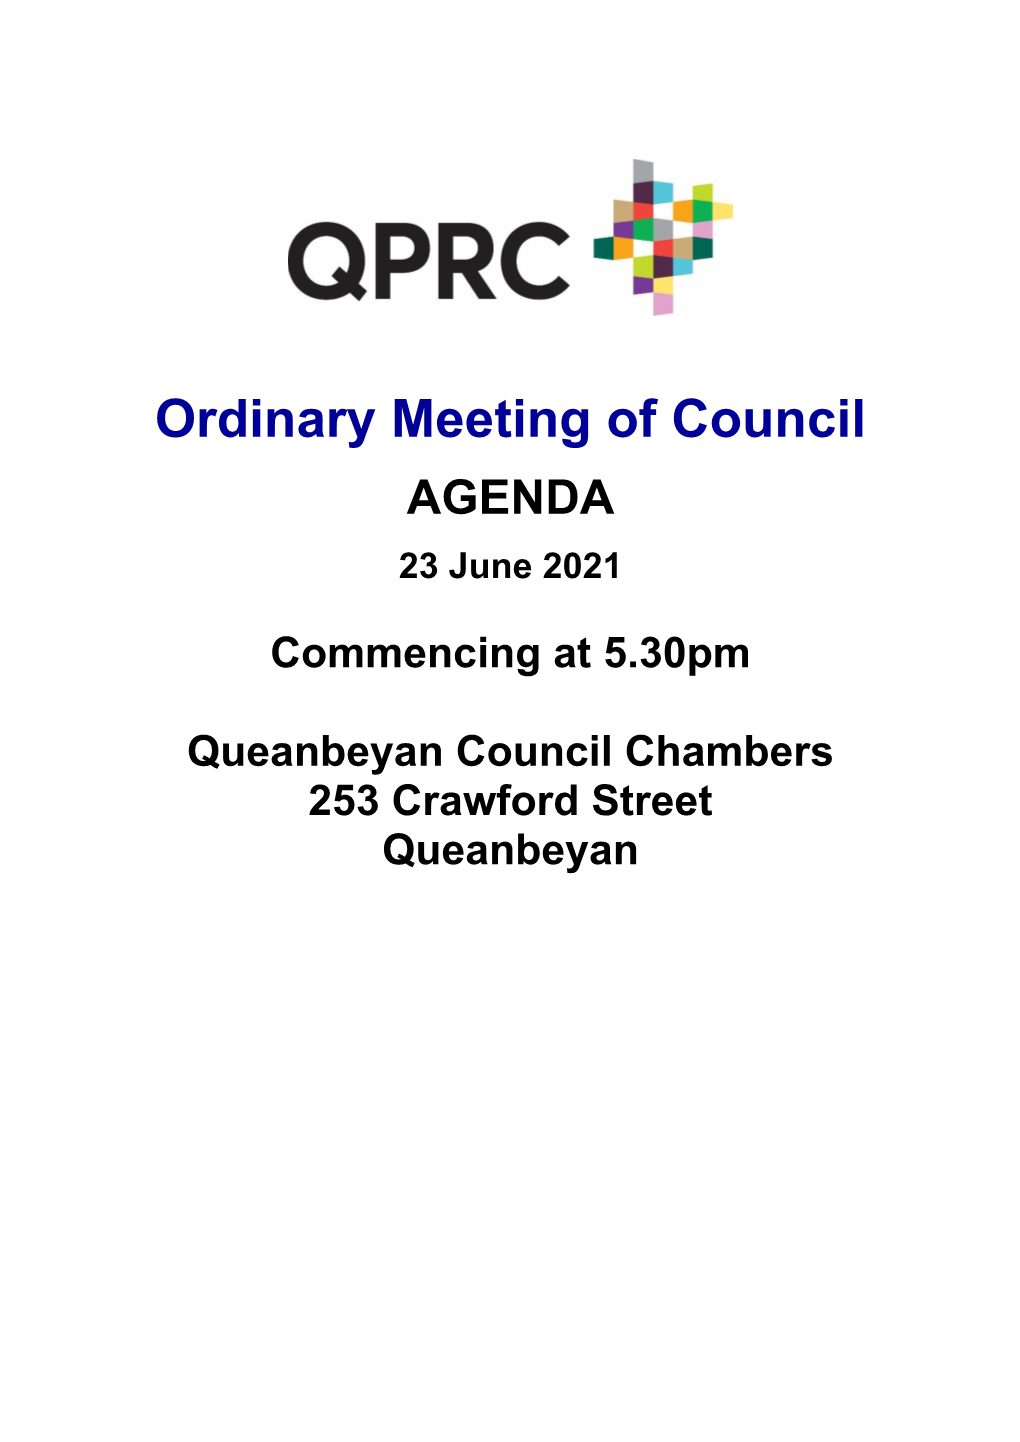 Agenda of Ordinary Meeting of Council